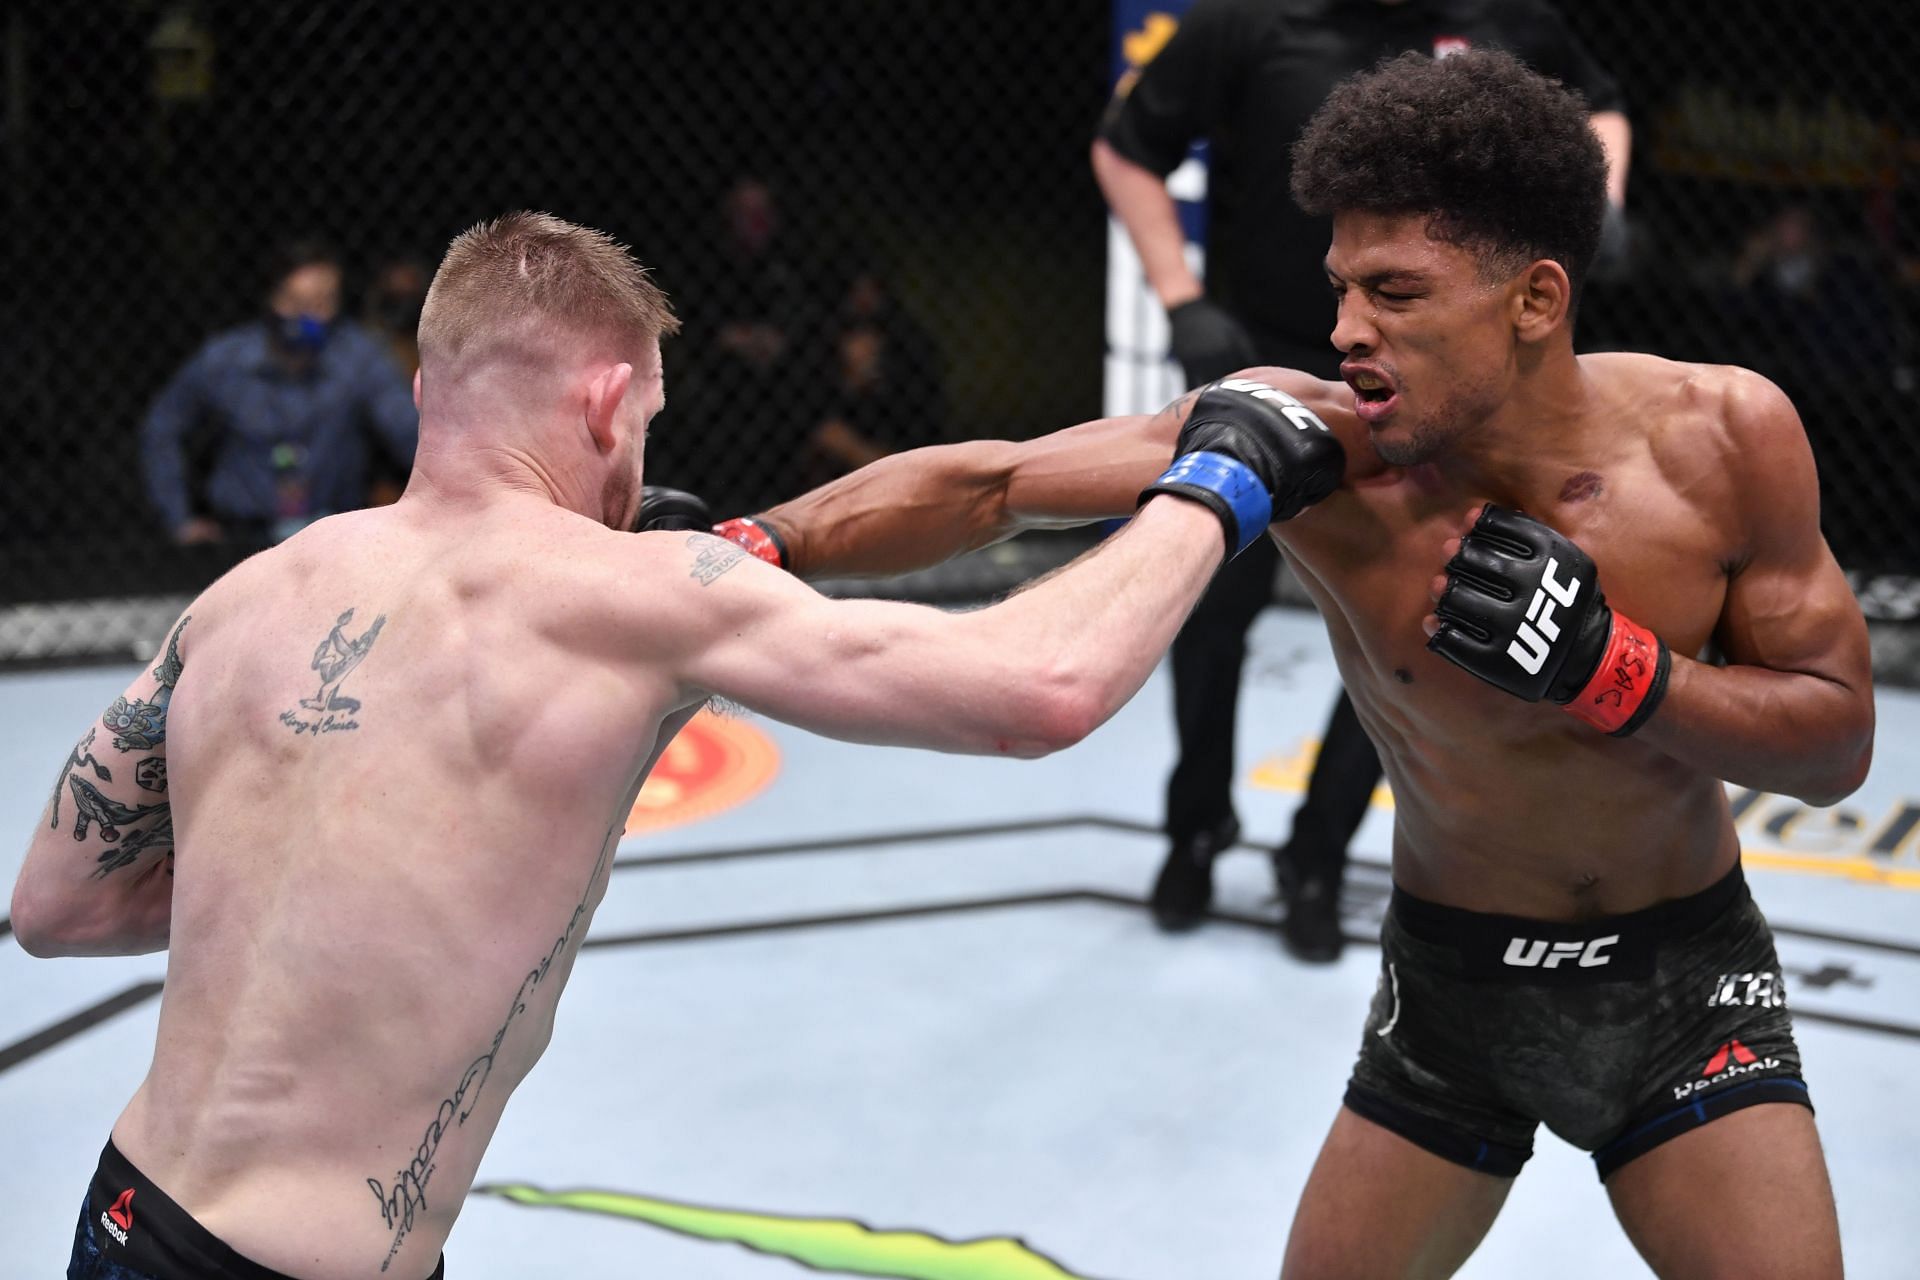 Longtime veteran Alex Caceres is probably in the best form of his career right now